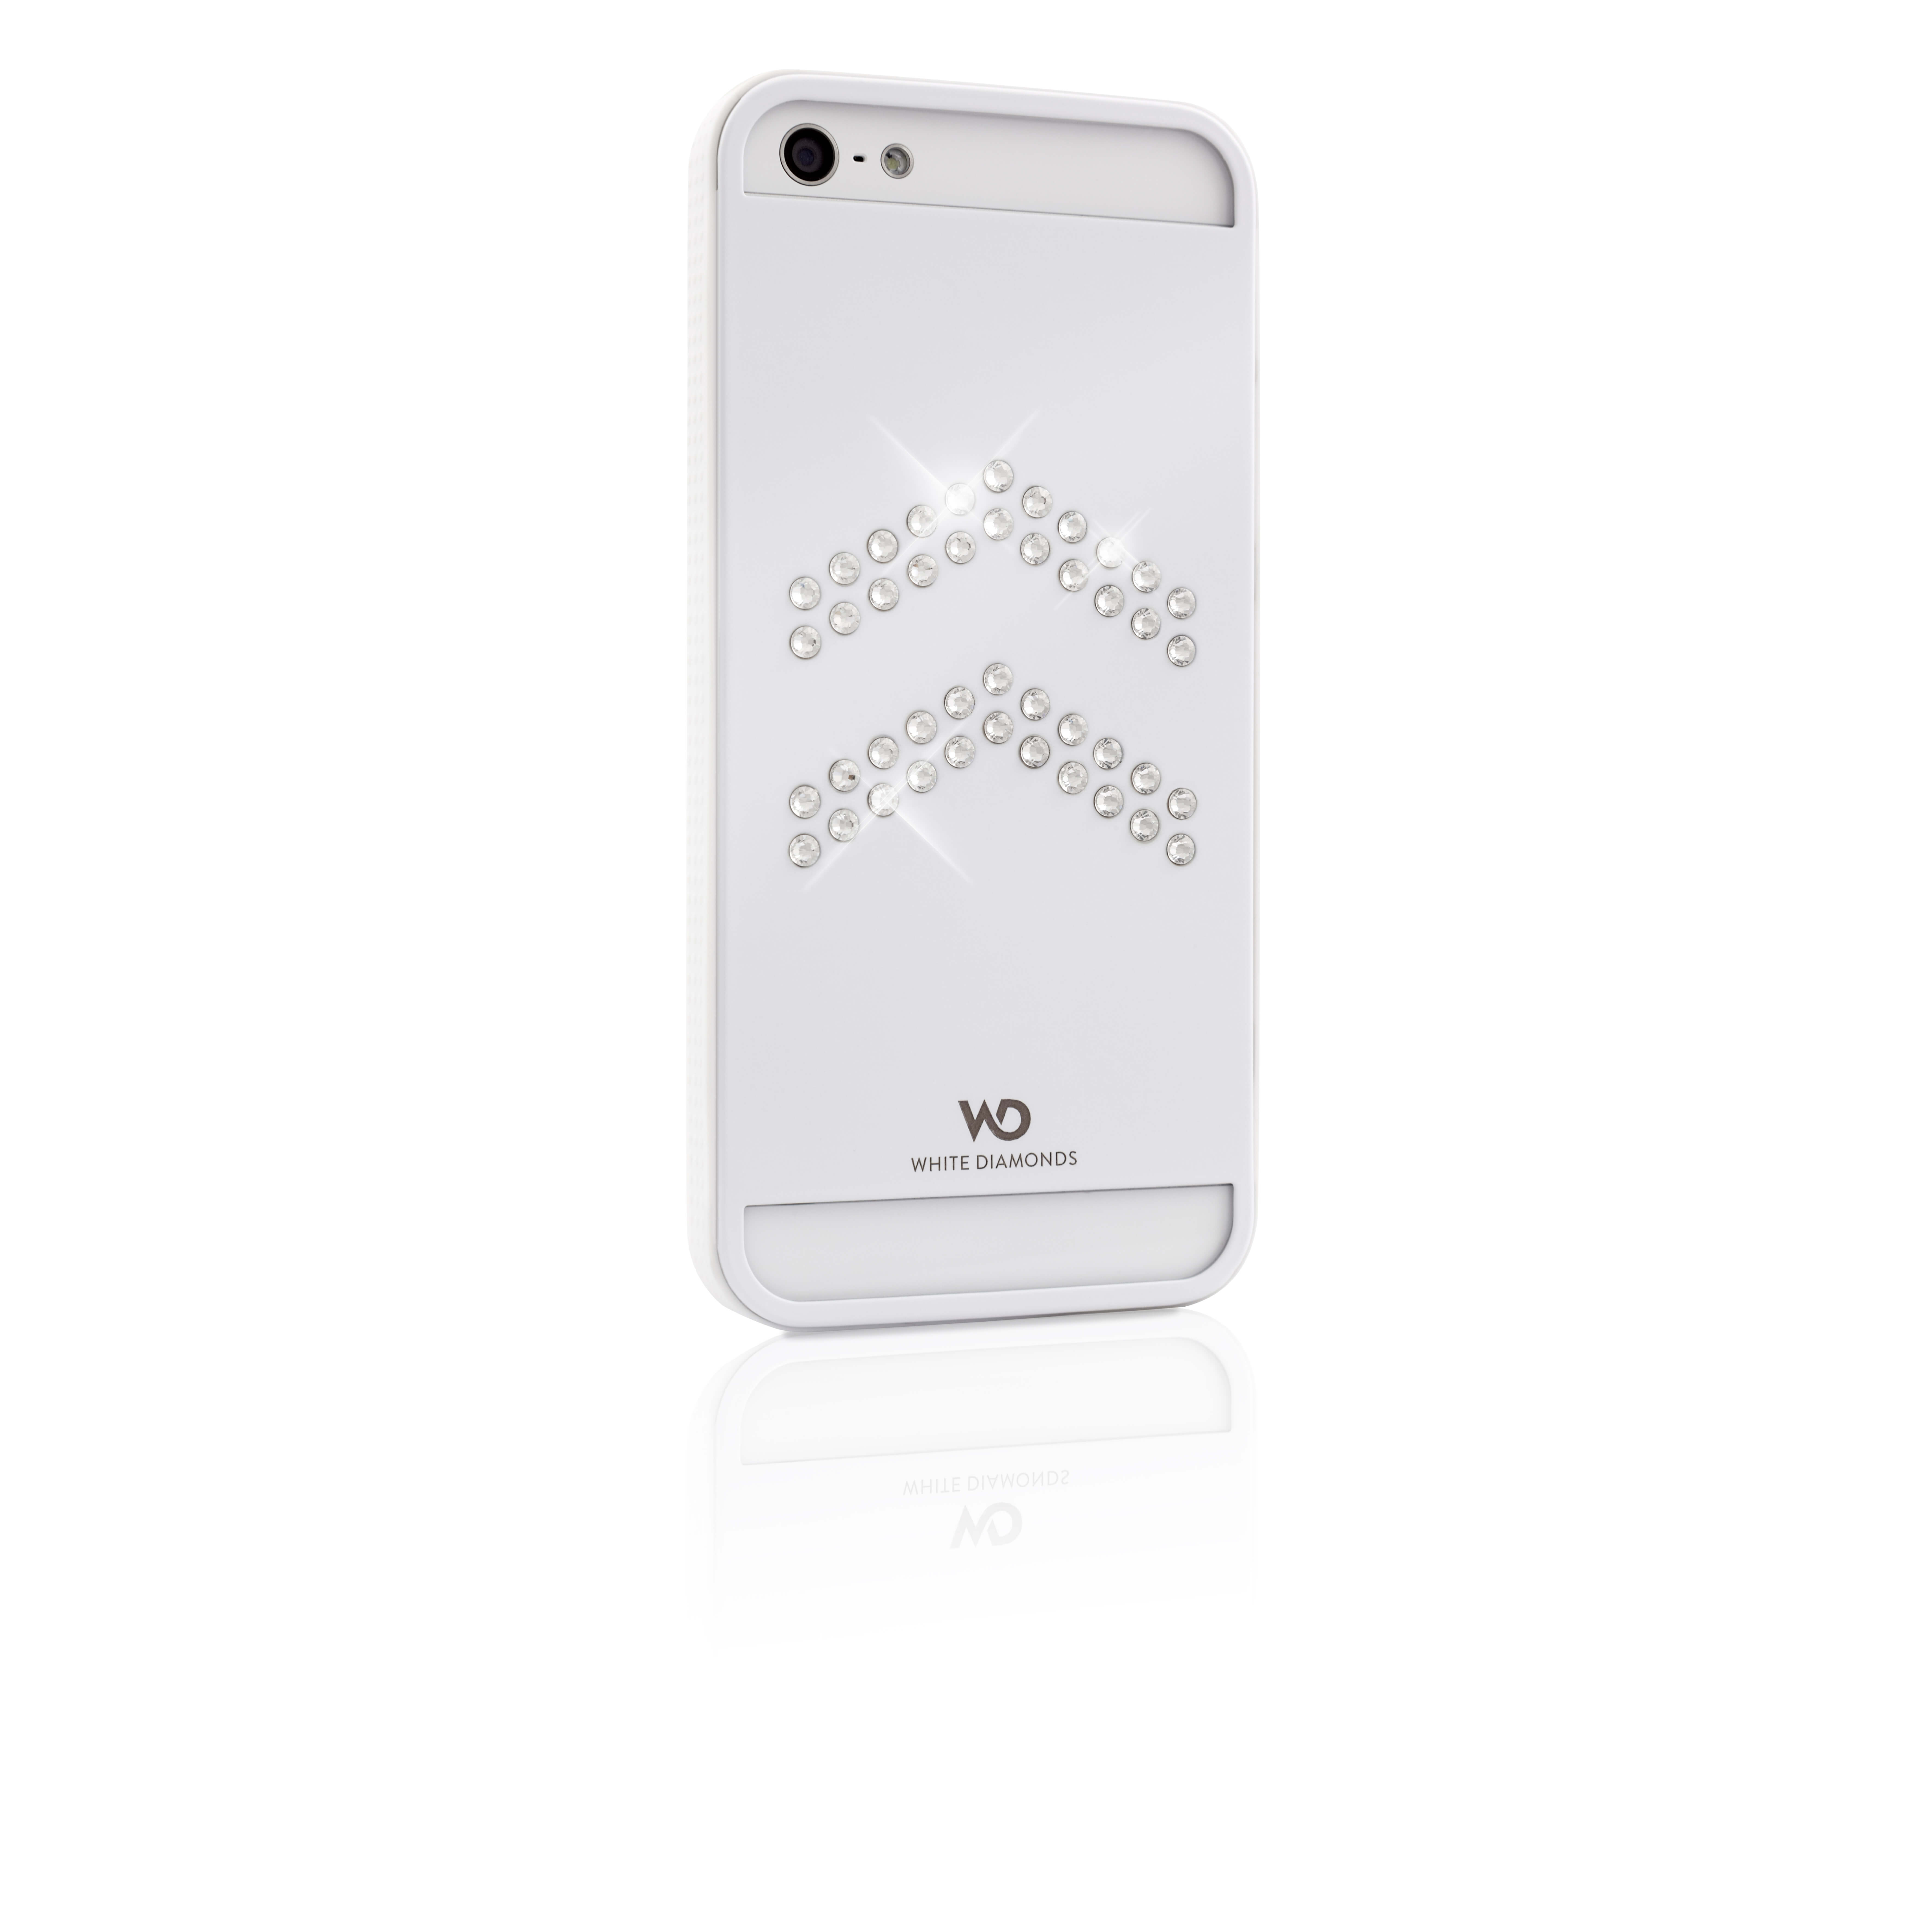 Mobile Phone Cover Metal Avia tor for iPhone 5, White